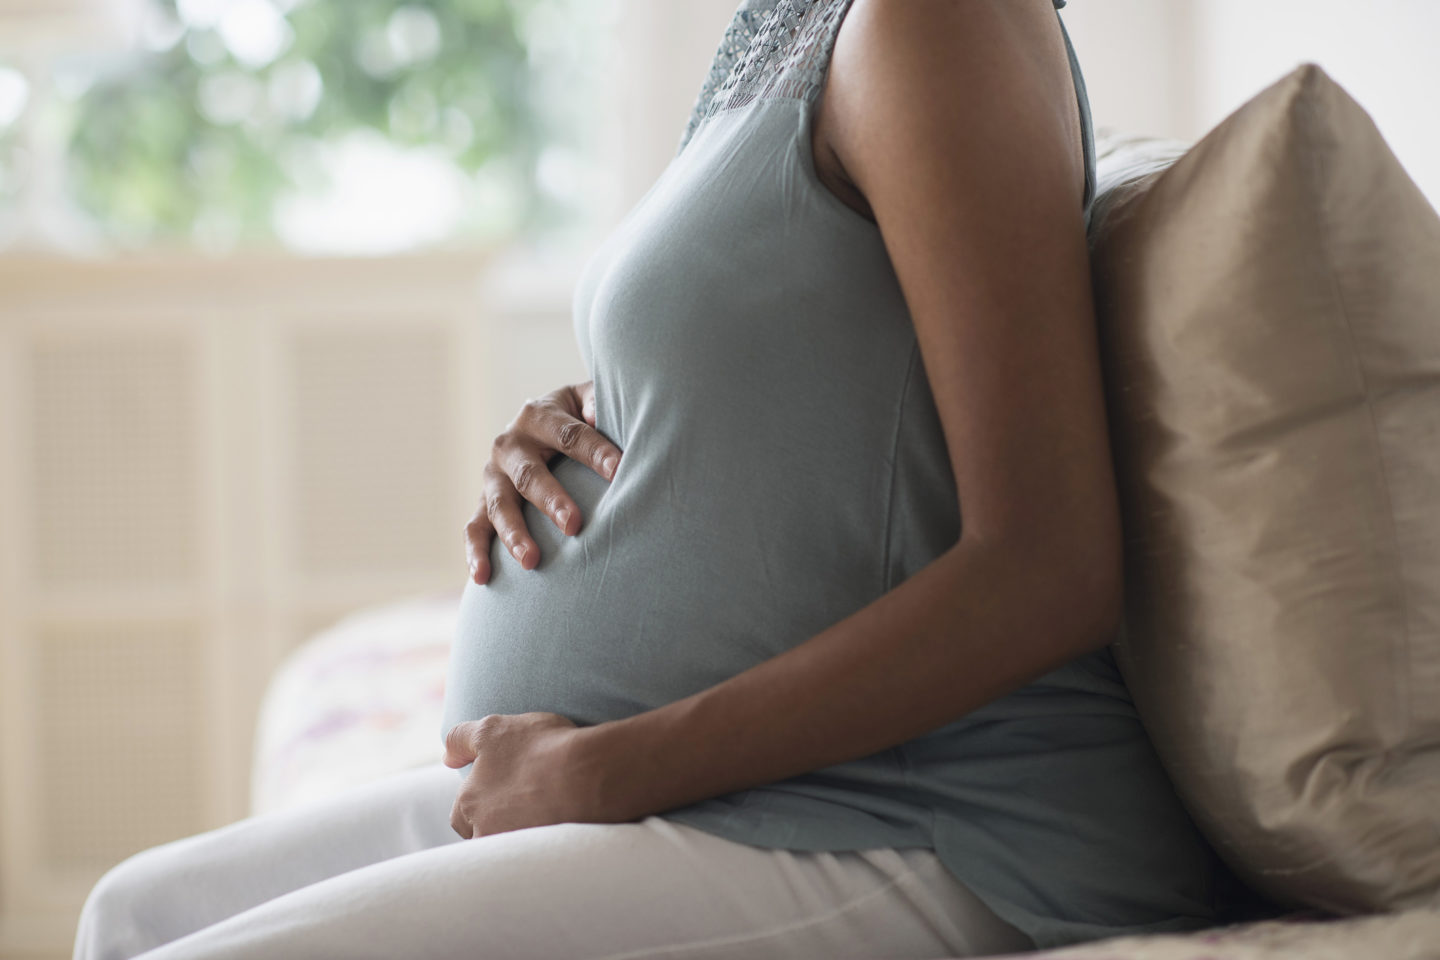 Should Pregnancy Come With Transport Privileges?